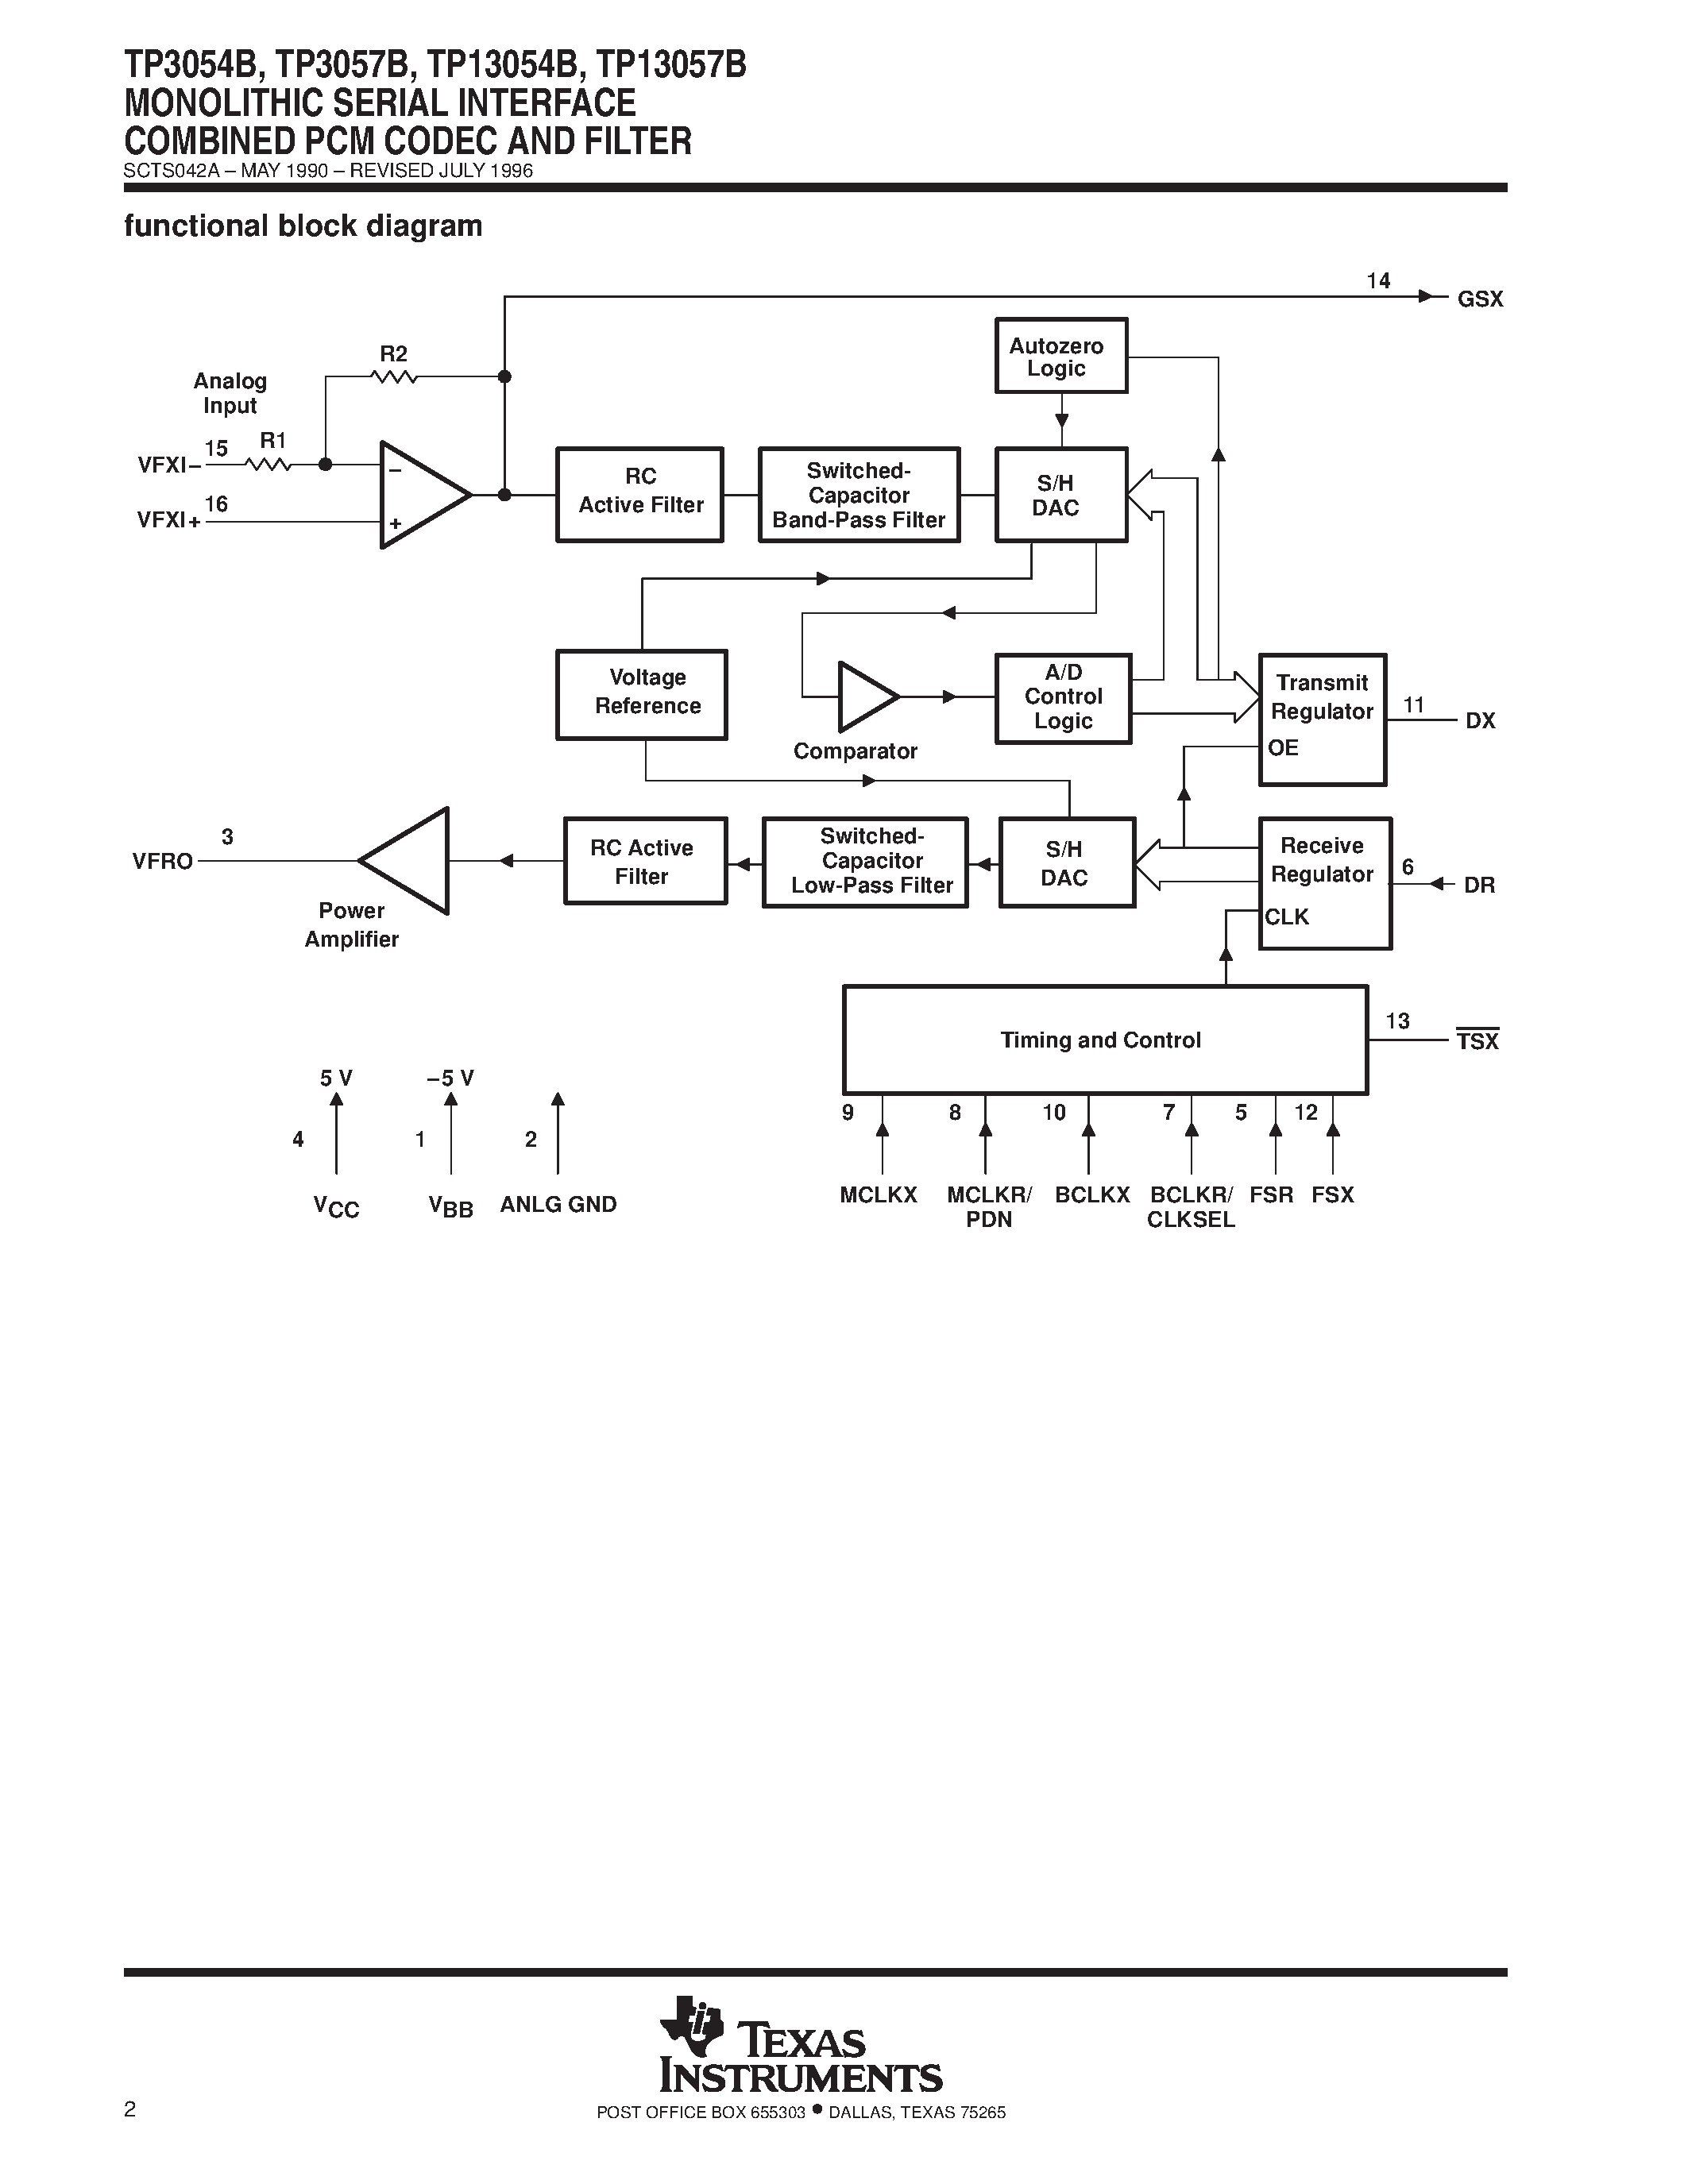 Datasheet TP13057BN - MONOLITHIC SERIAL INTERFACE COMBINED PCM CODEC AND FILTER page 2